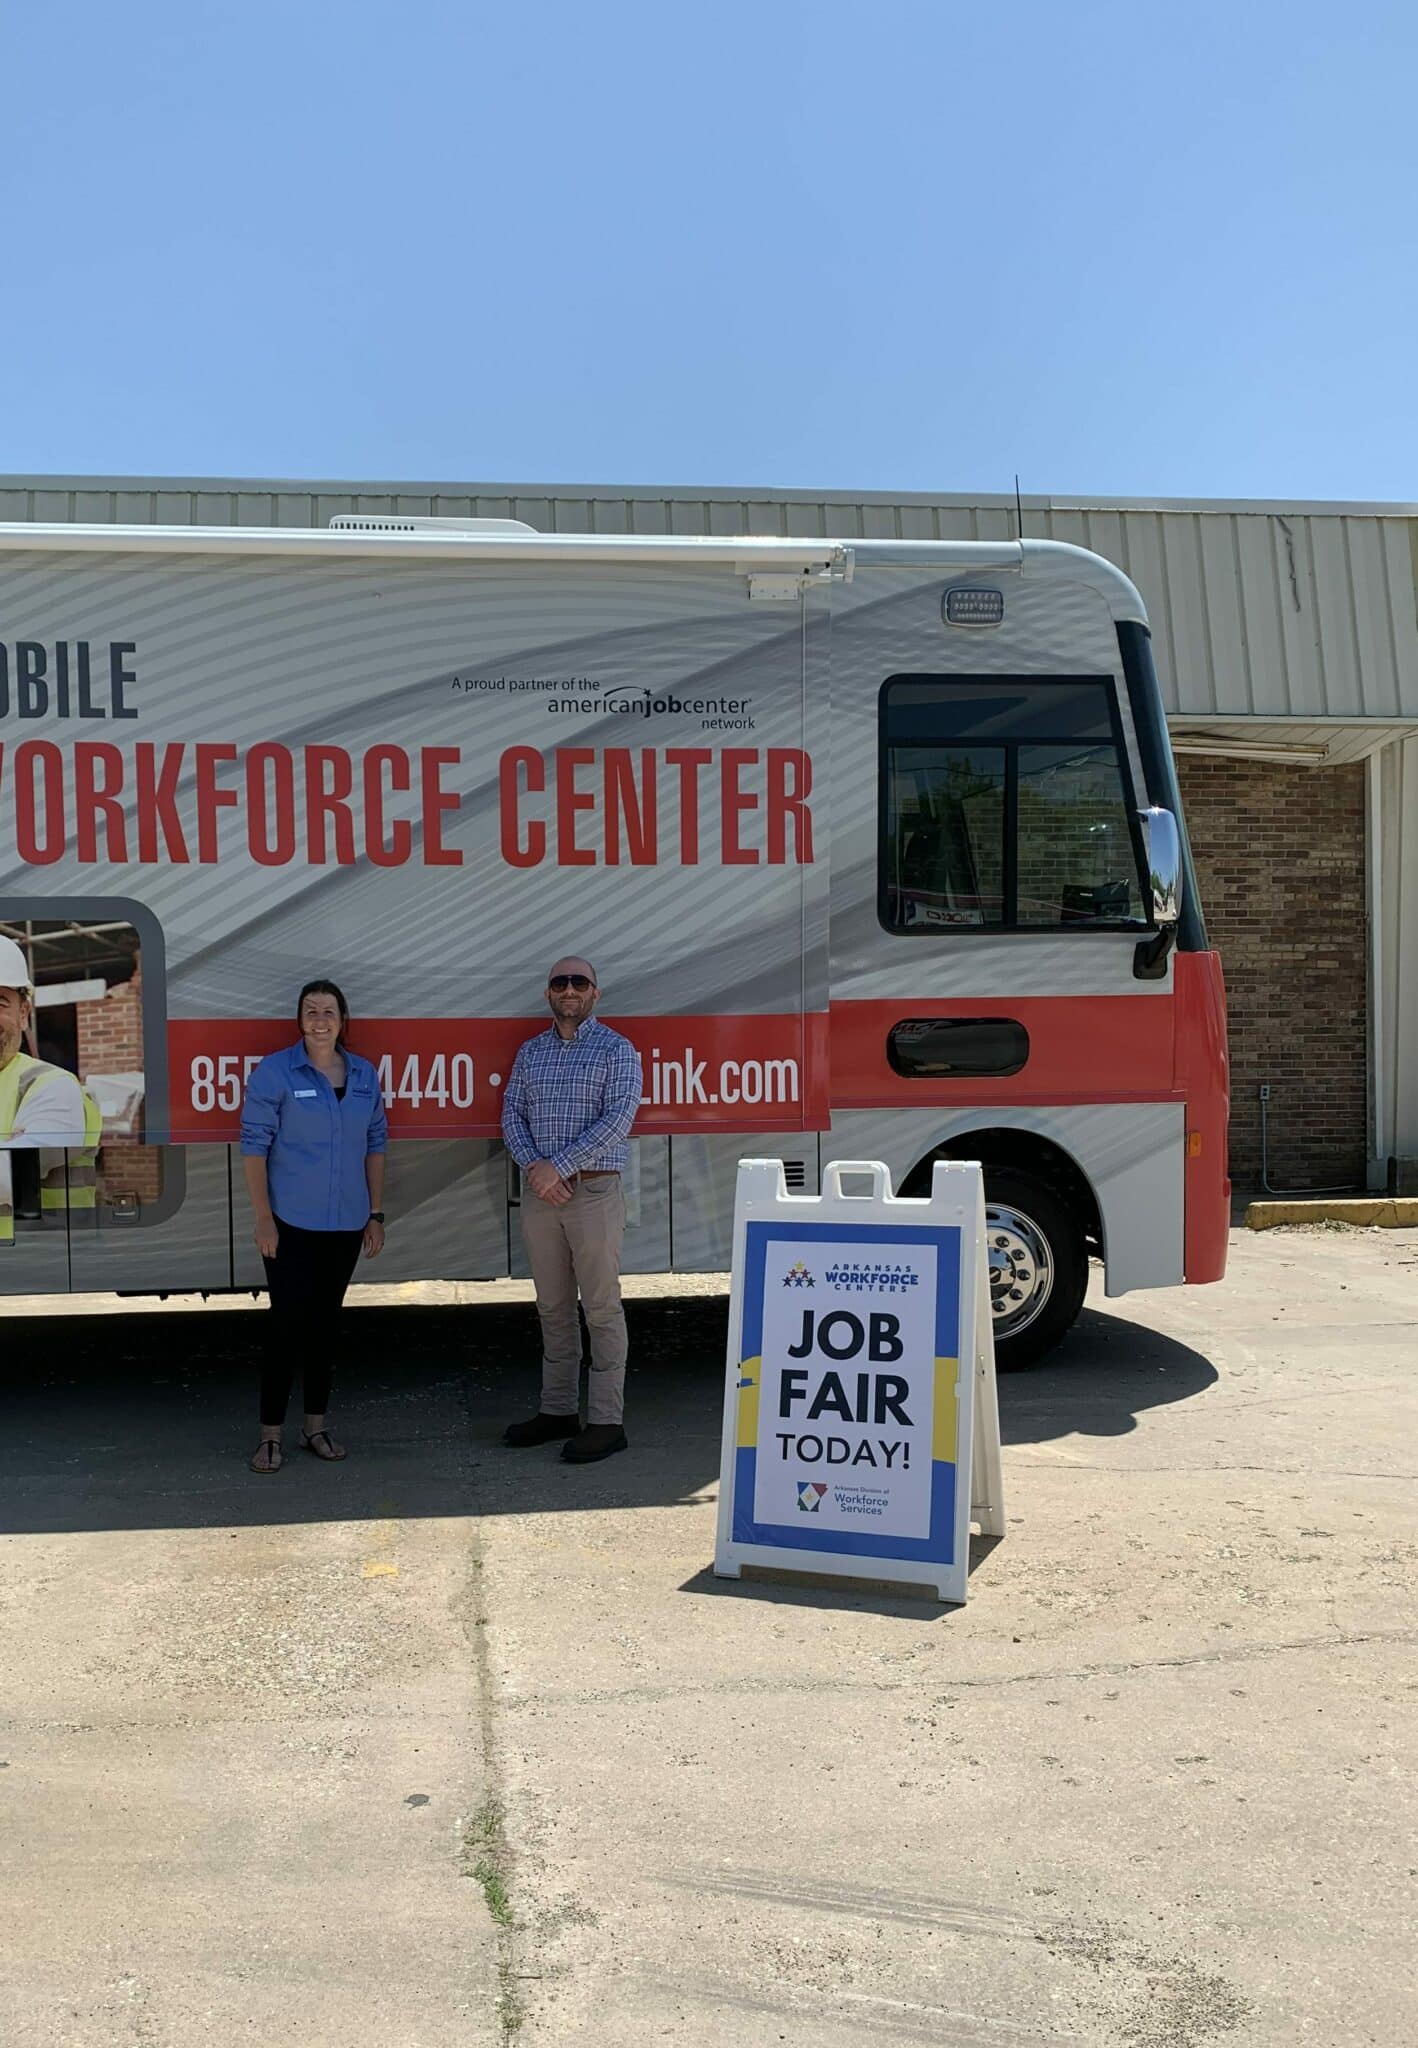 Two DWS employees posing along the side of a large mobile workforce center vehicle